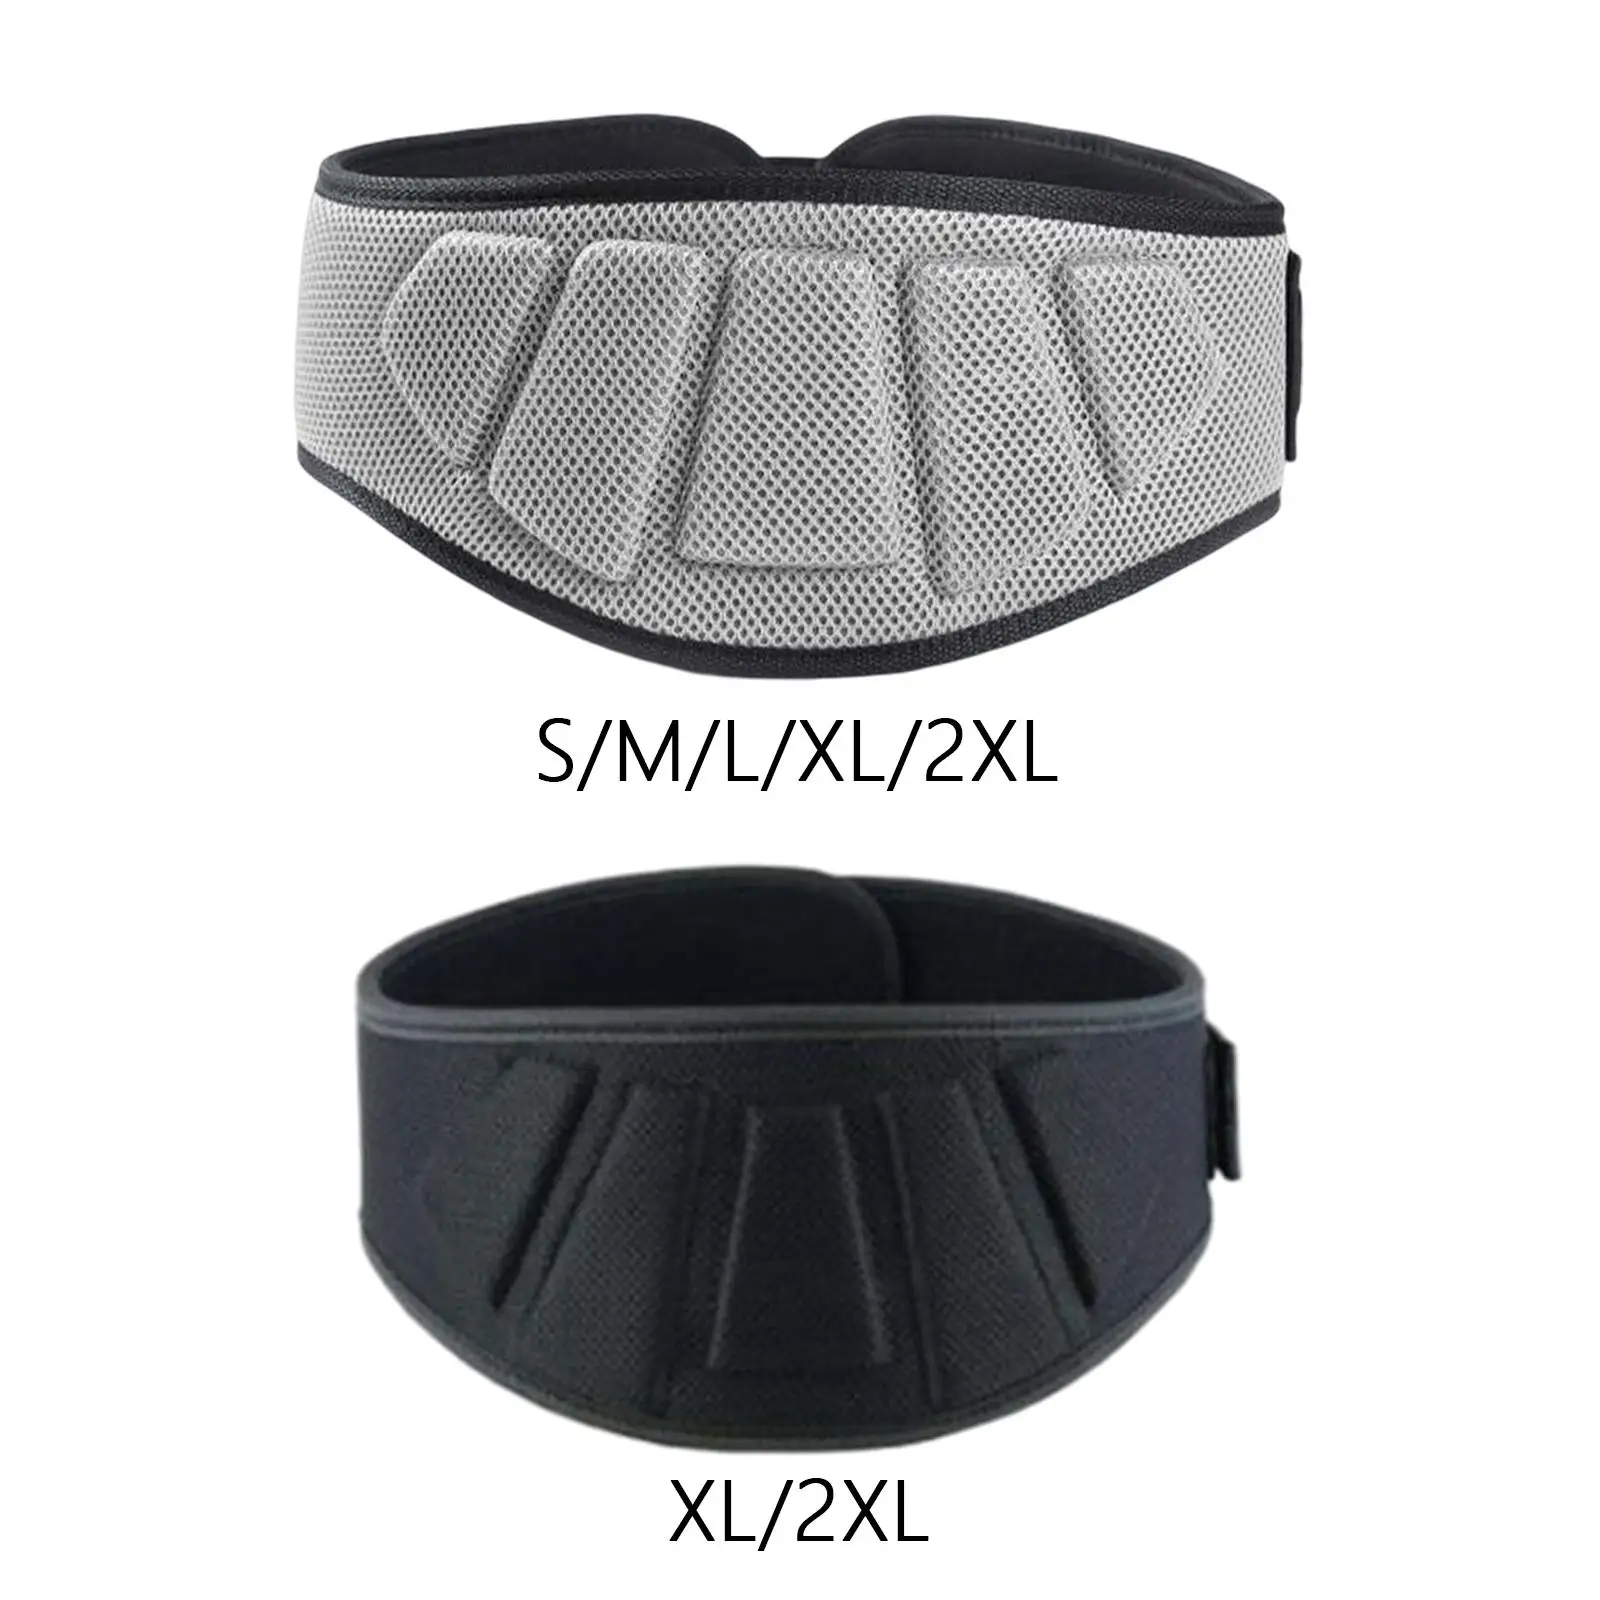 Breathable weightlifting belt, back support weightlifting exercise, training